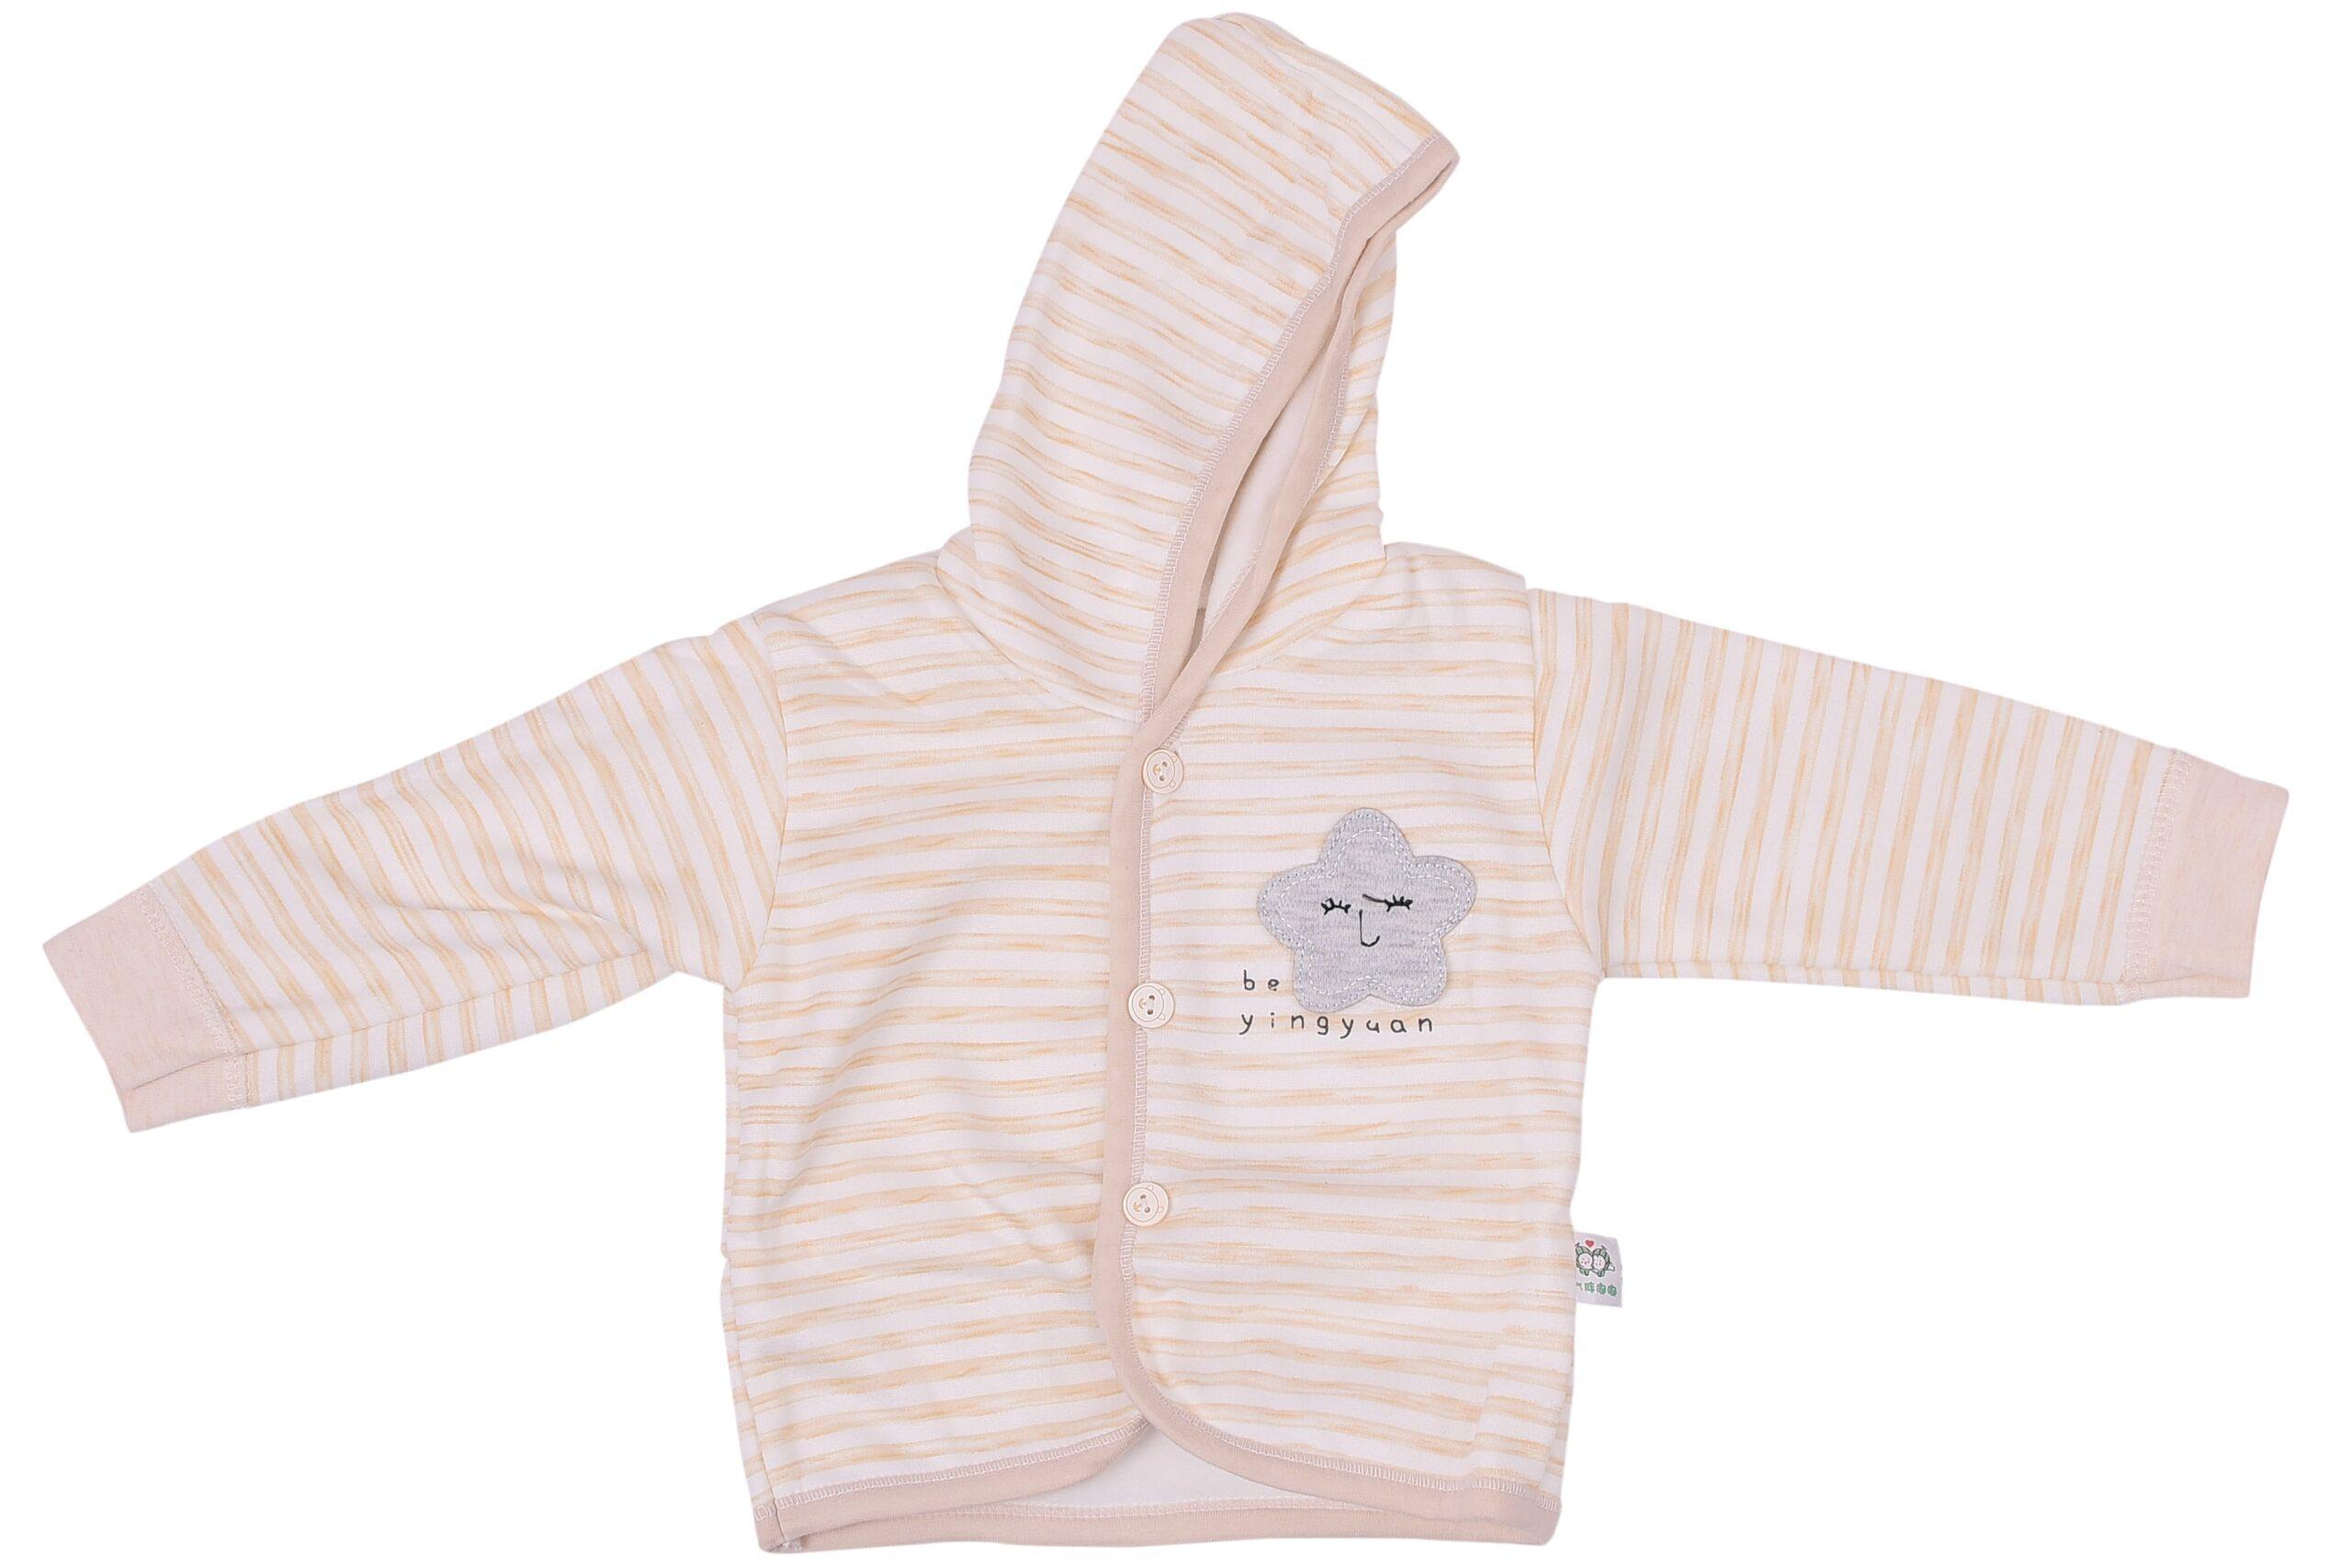 Baby's Warm Unisex Cotton Suit Set - 1Pajama and 1Hooded Shirt- Grey Strip